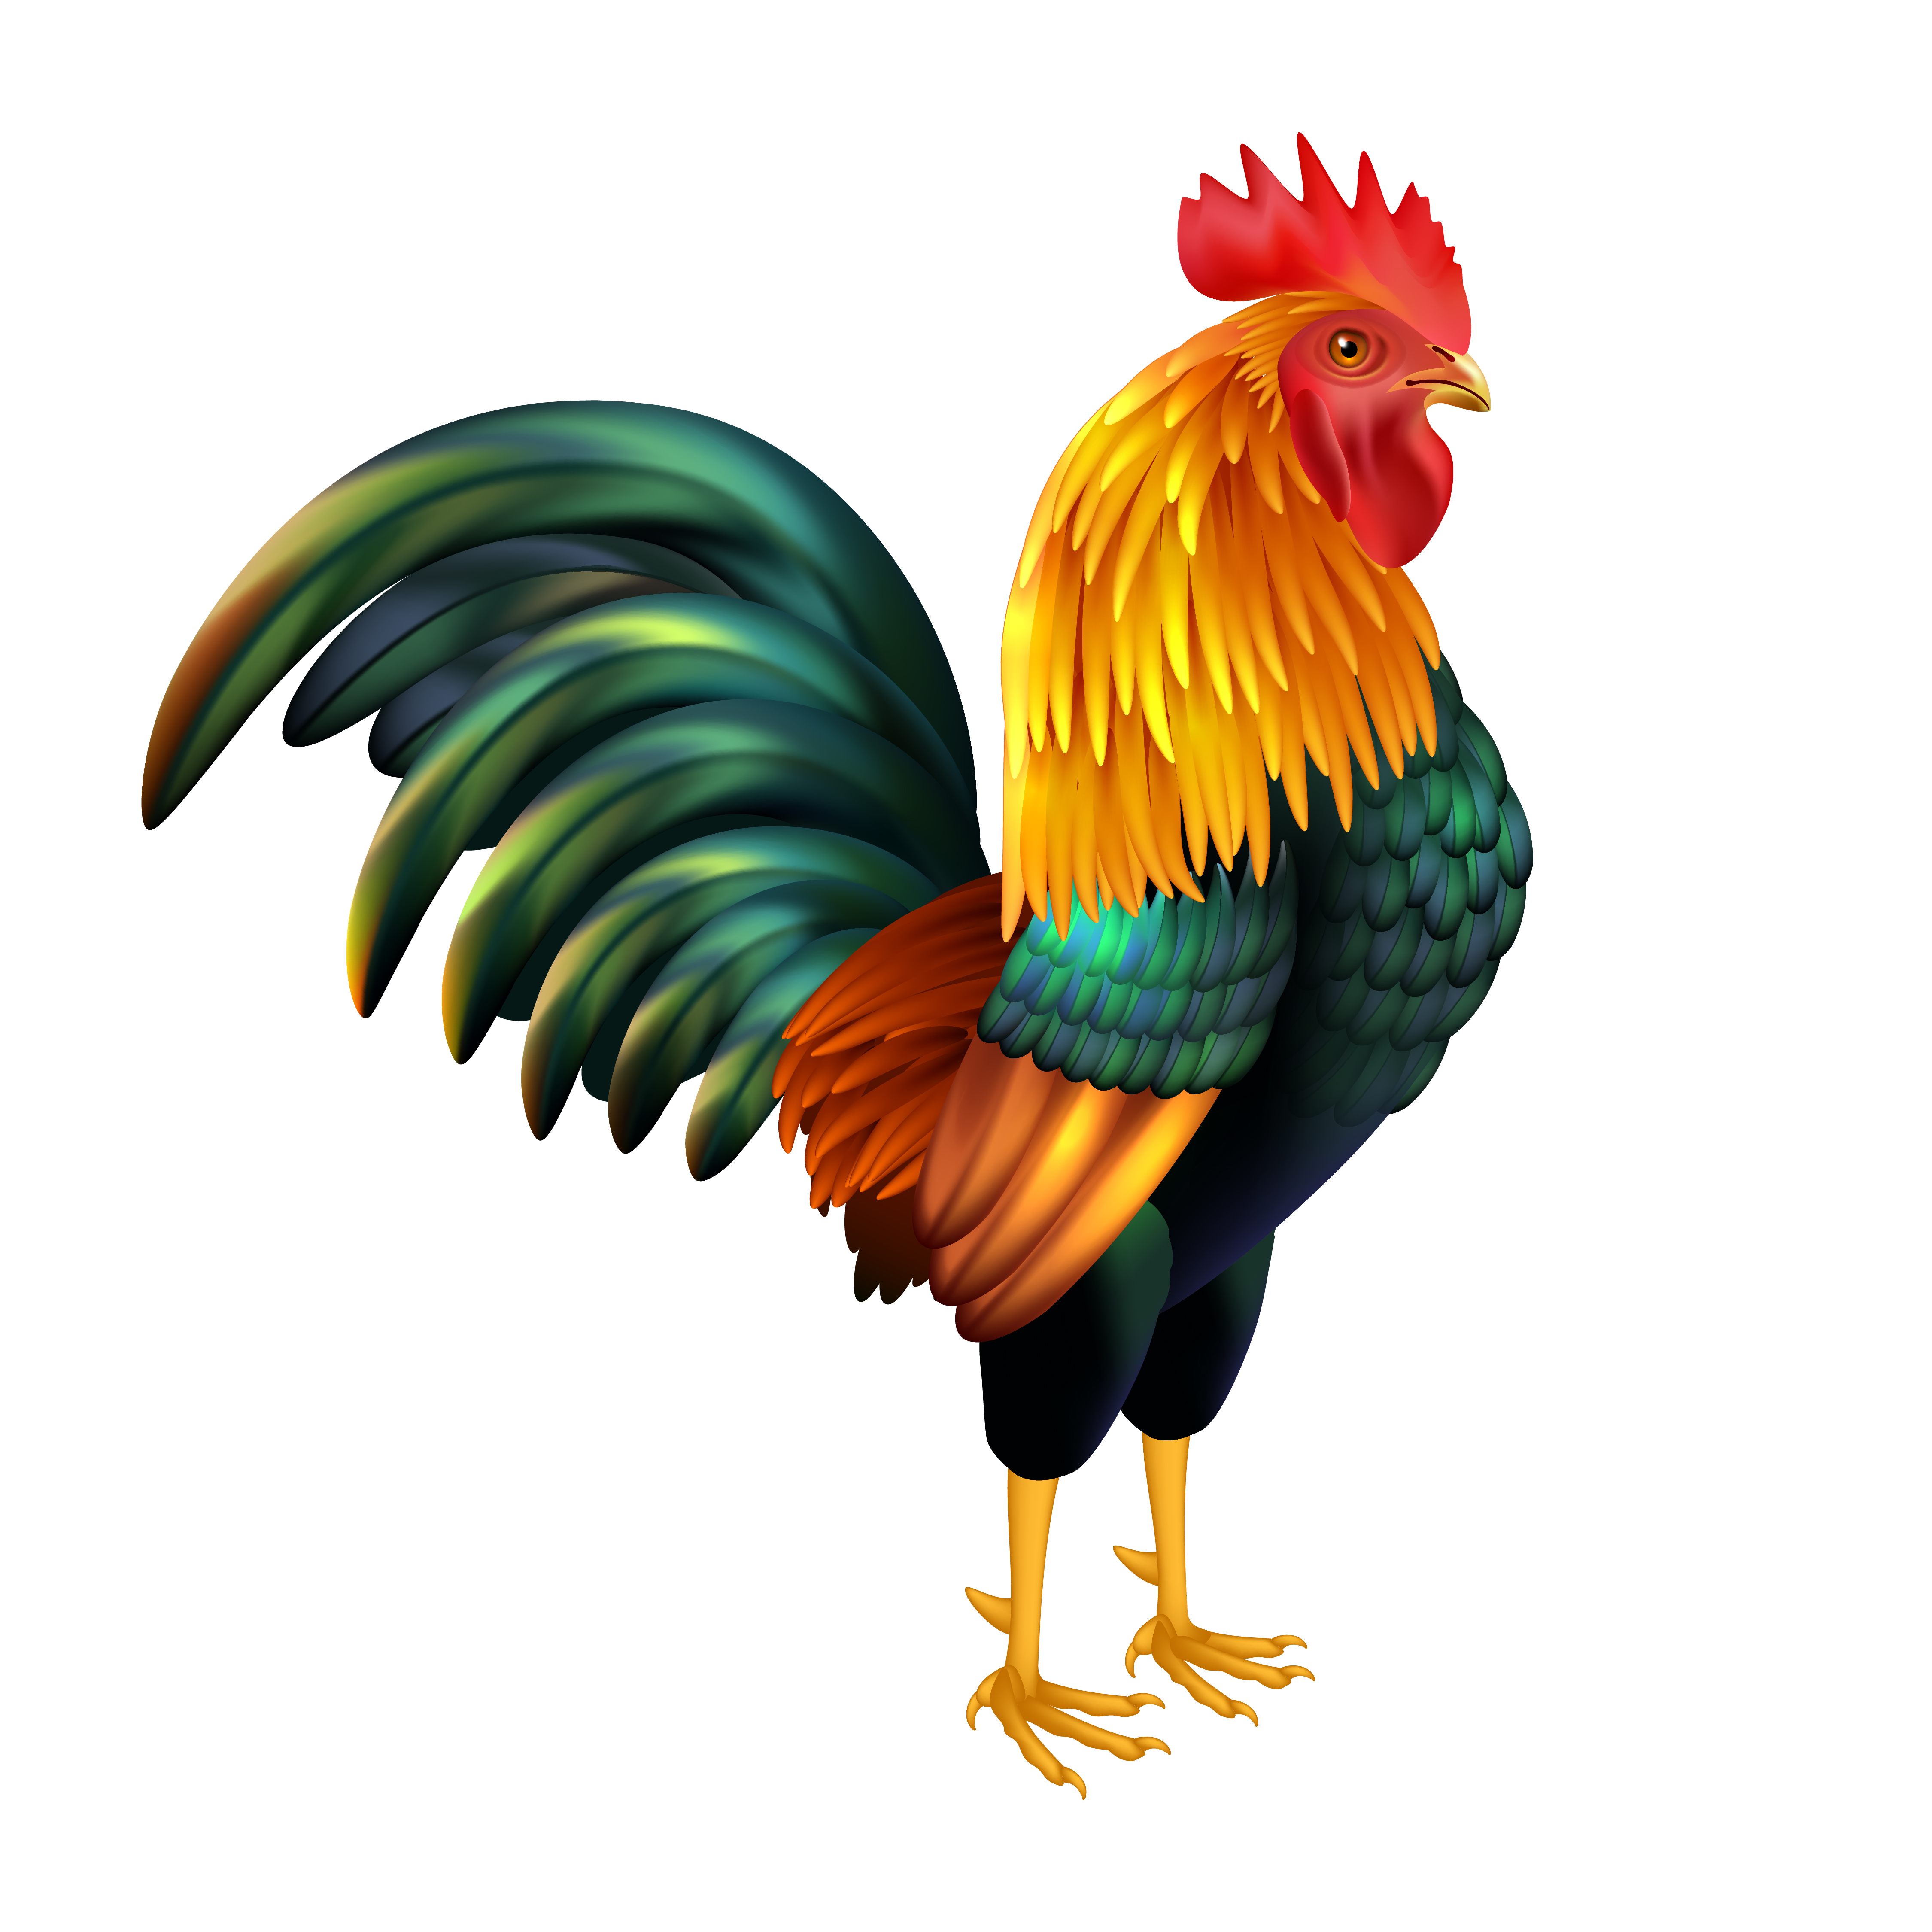 Download Colorful Realistic Rooster - Download Free Vectors, Clipart Graphics & Vector Art